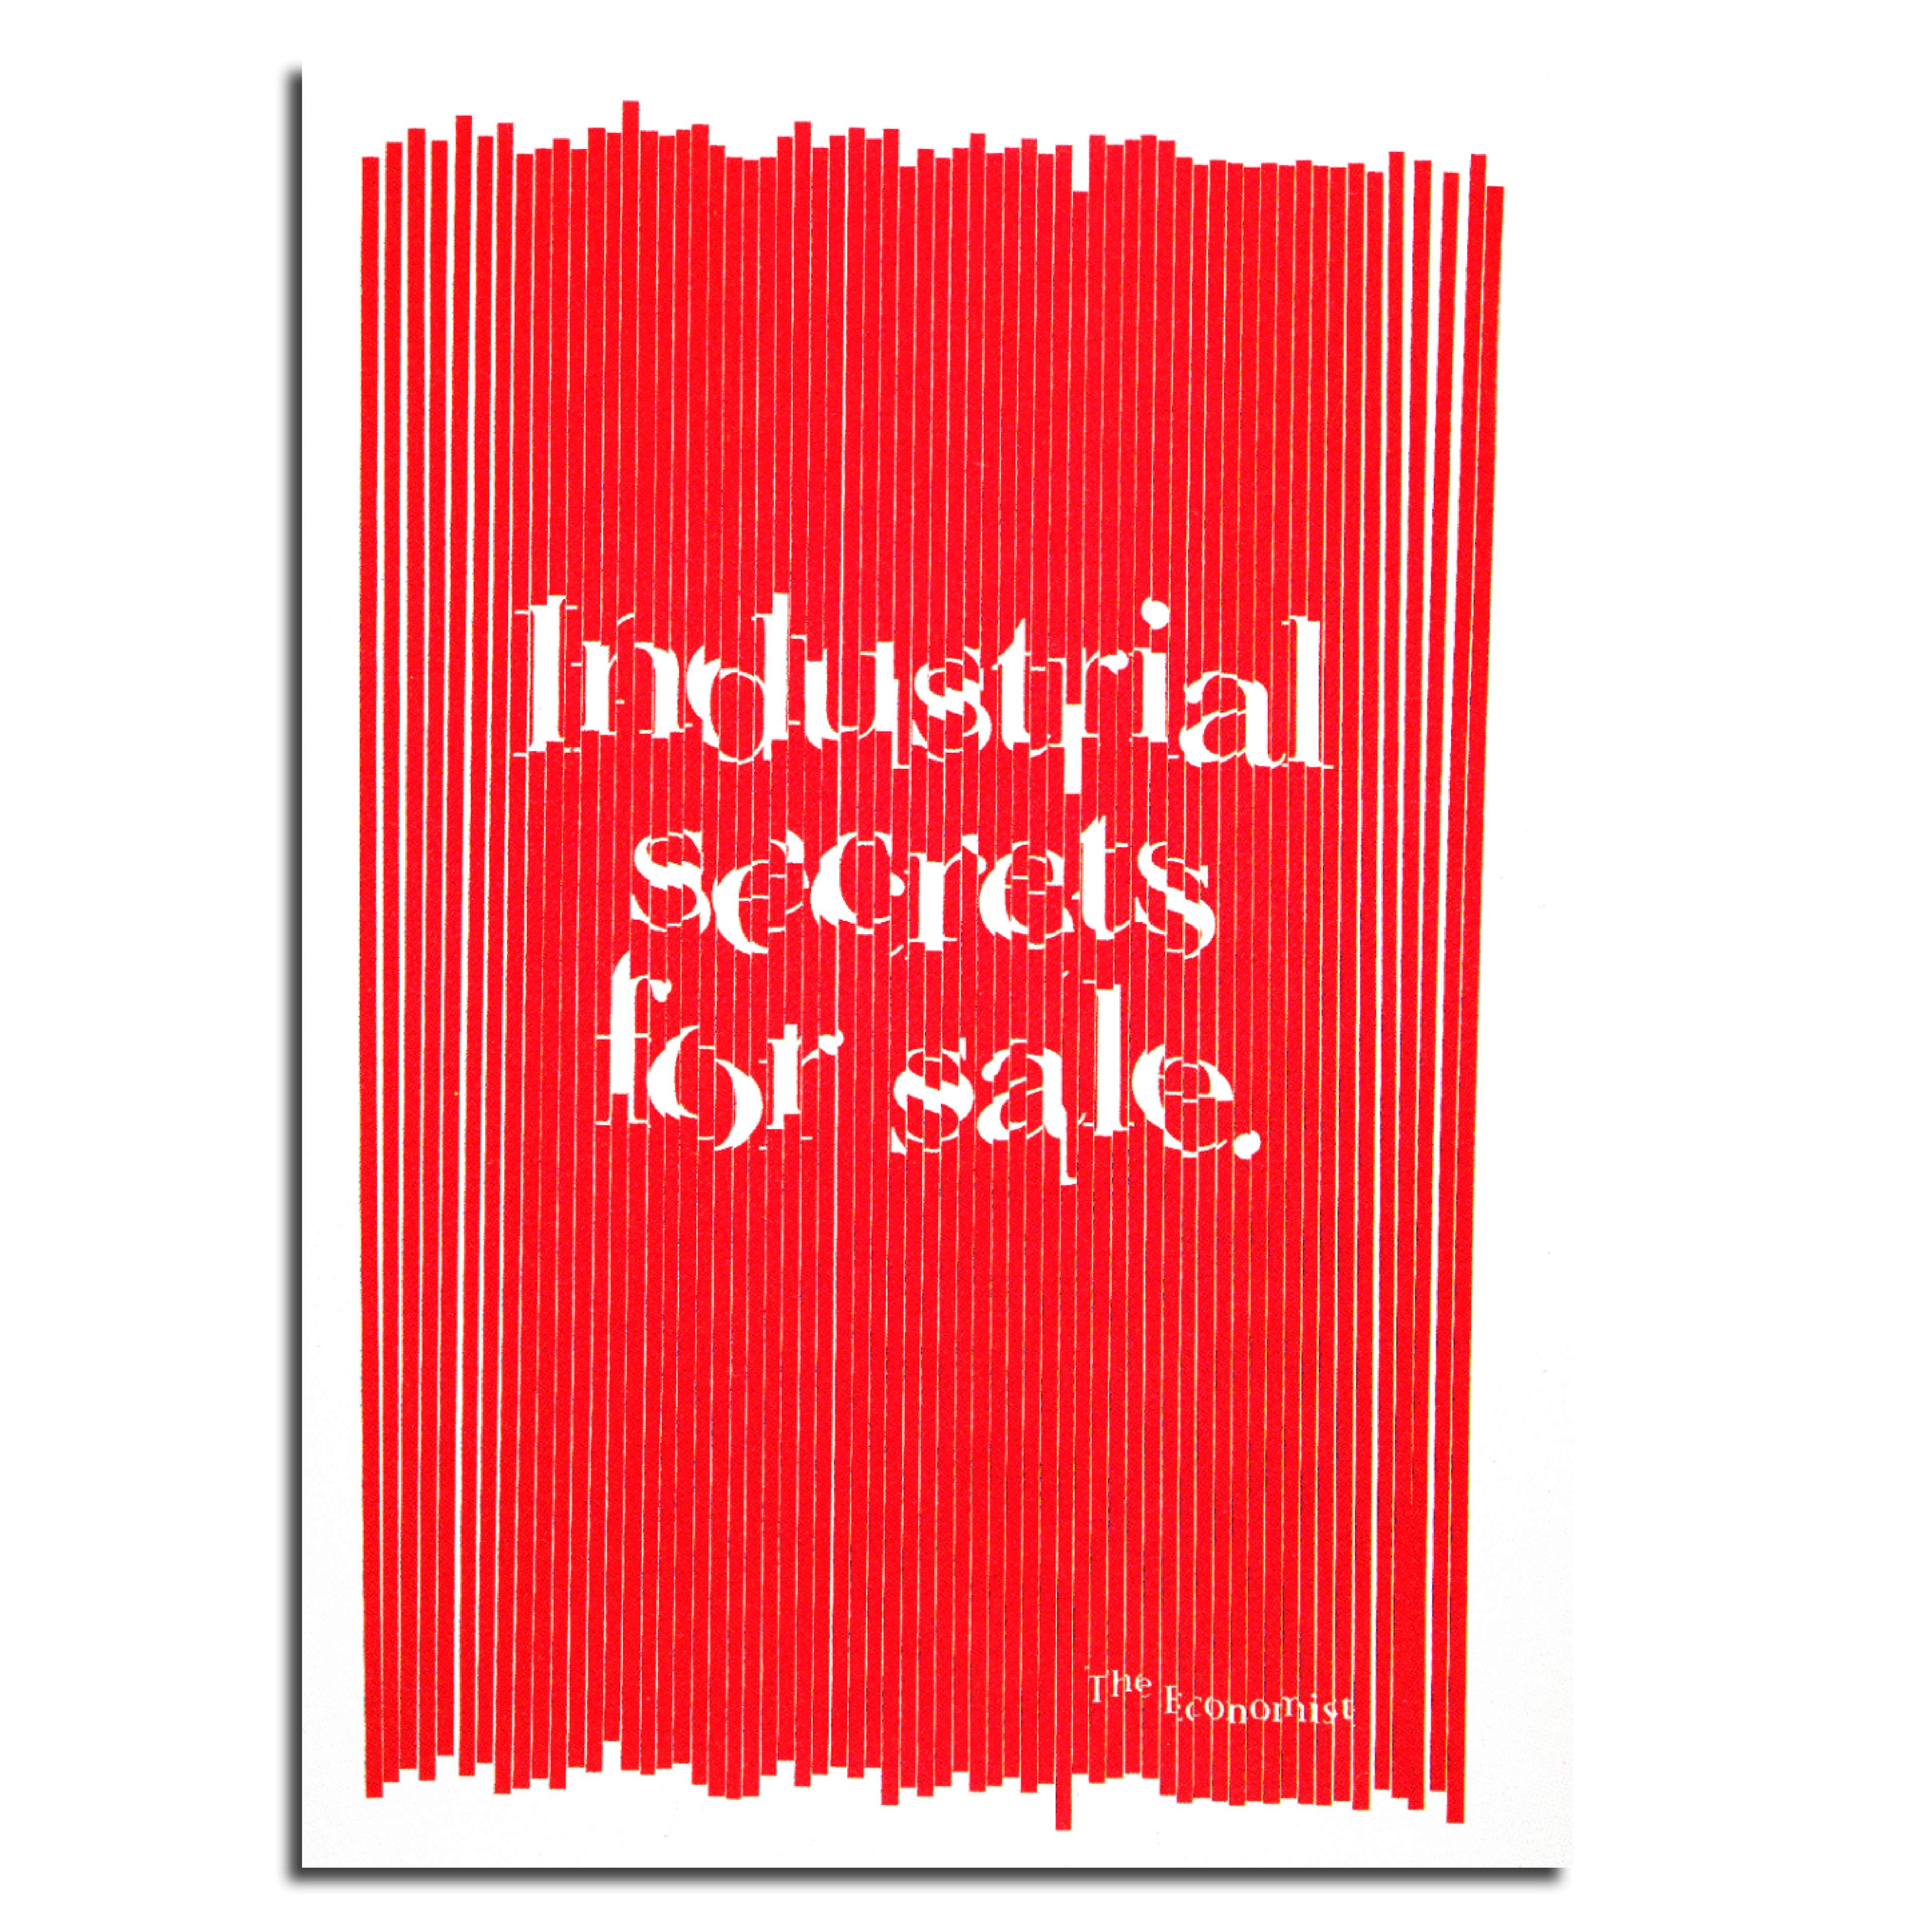 Industrial secrets for sale shredded into pieces. Award-winning Economist poster.